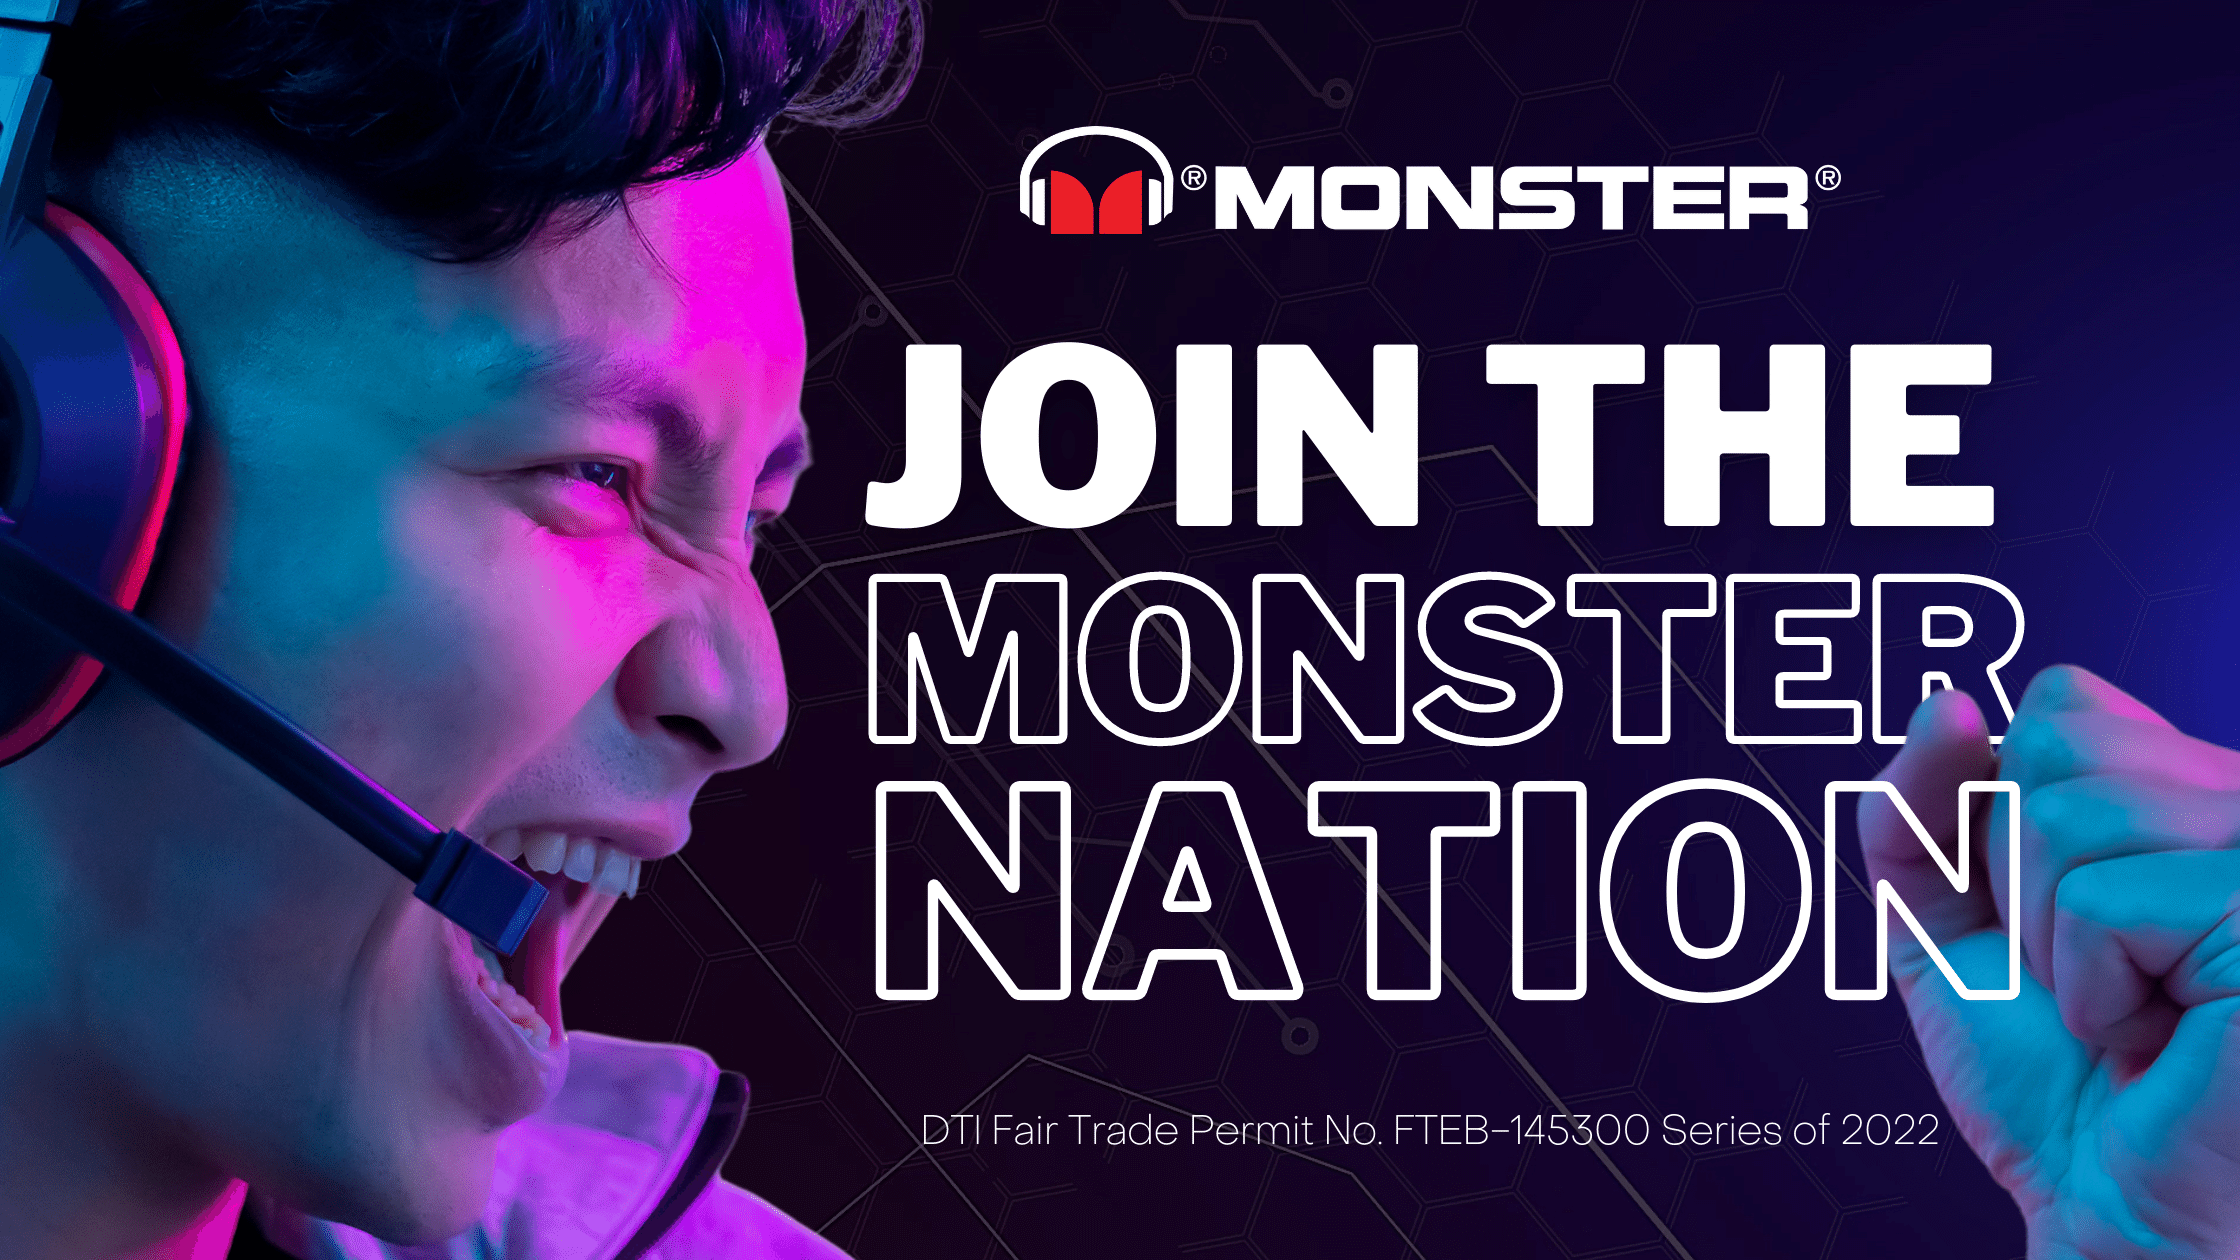 Calling all #PureMonsterGamers! Monster Gaming Philippines continues to celebrate the rise of the Pinoy Esports scene with awesome promotions this June